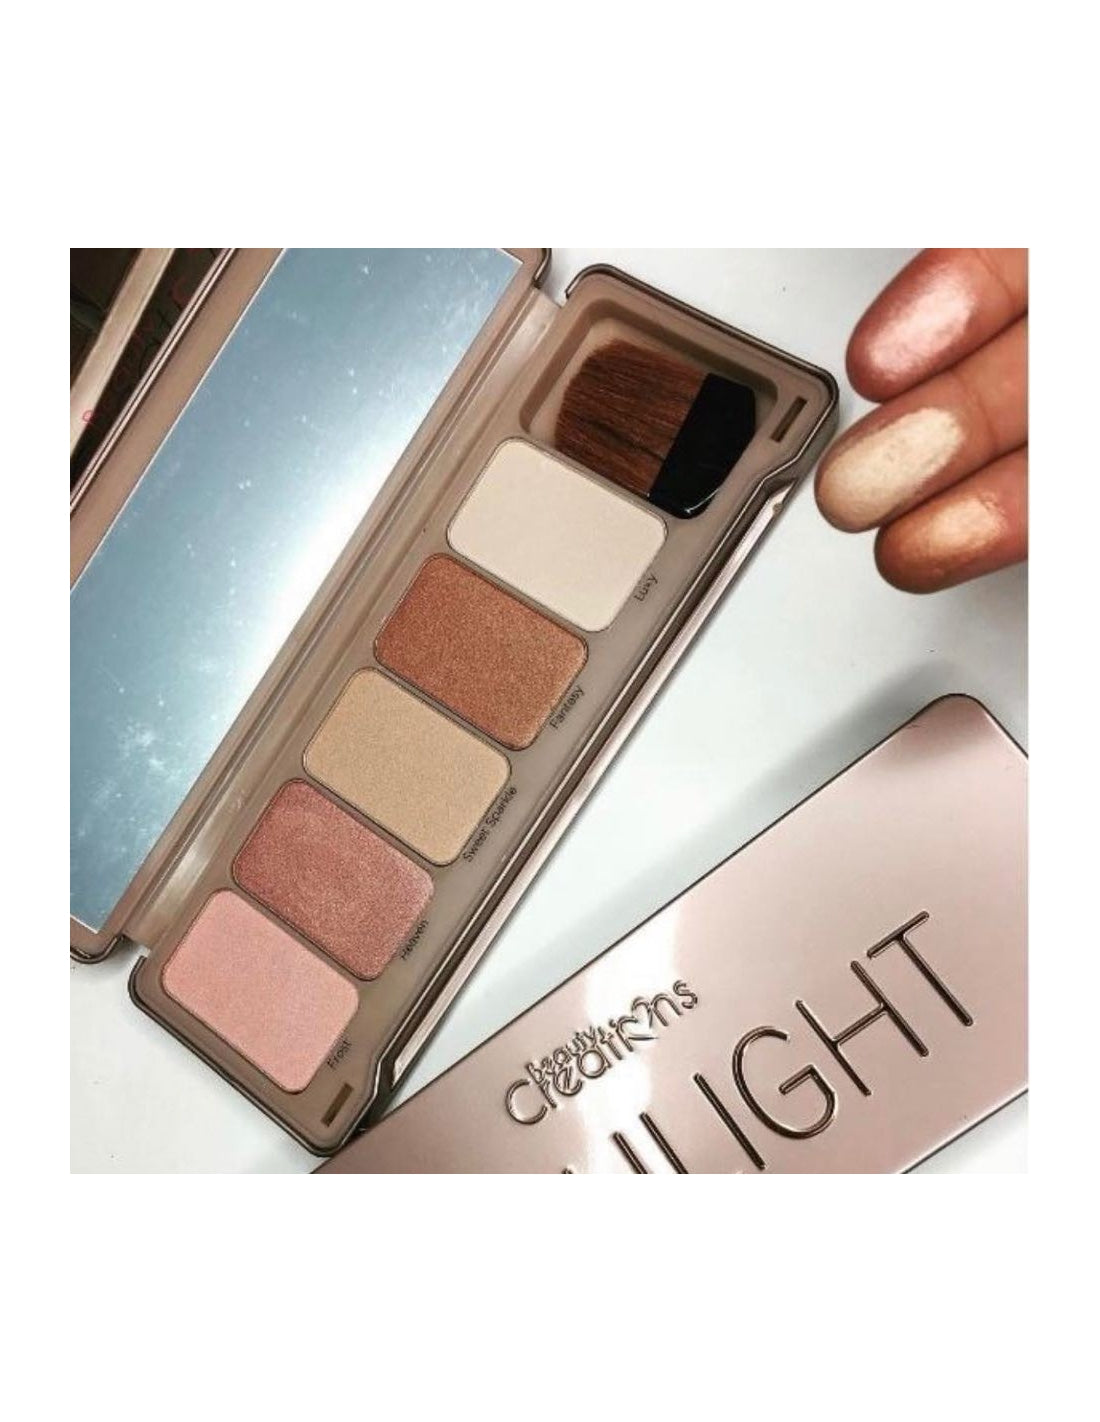 Beauty Creations highlighters